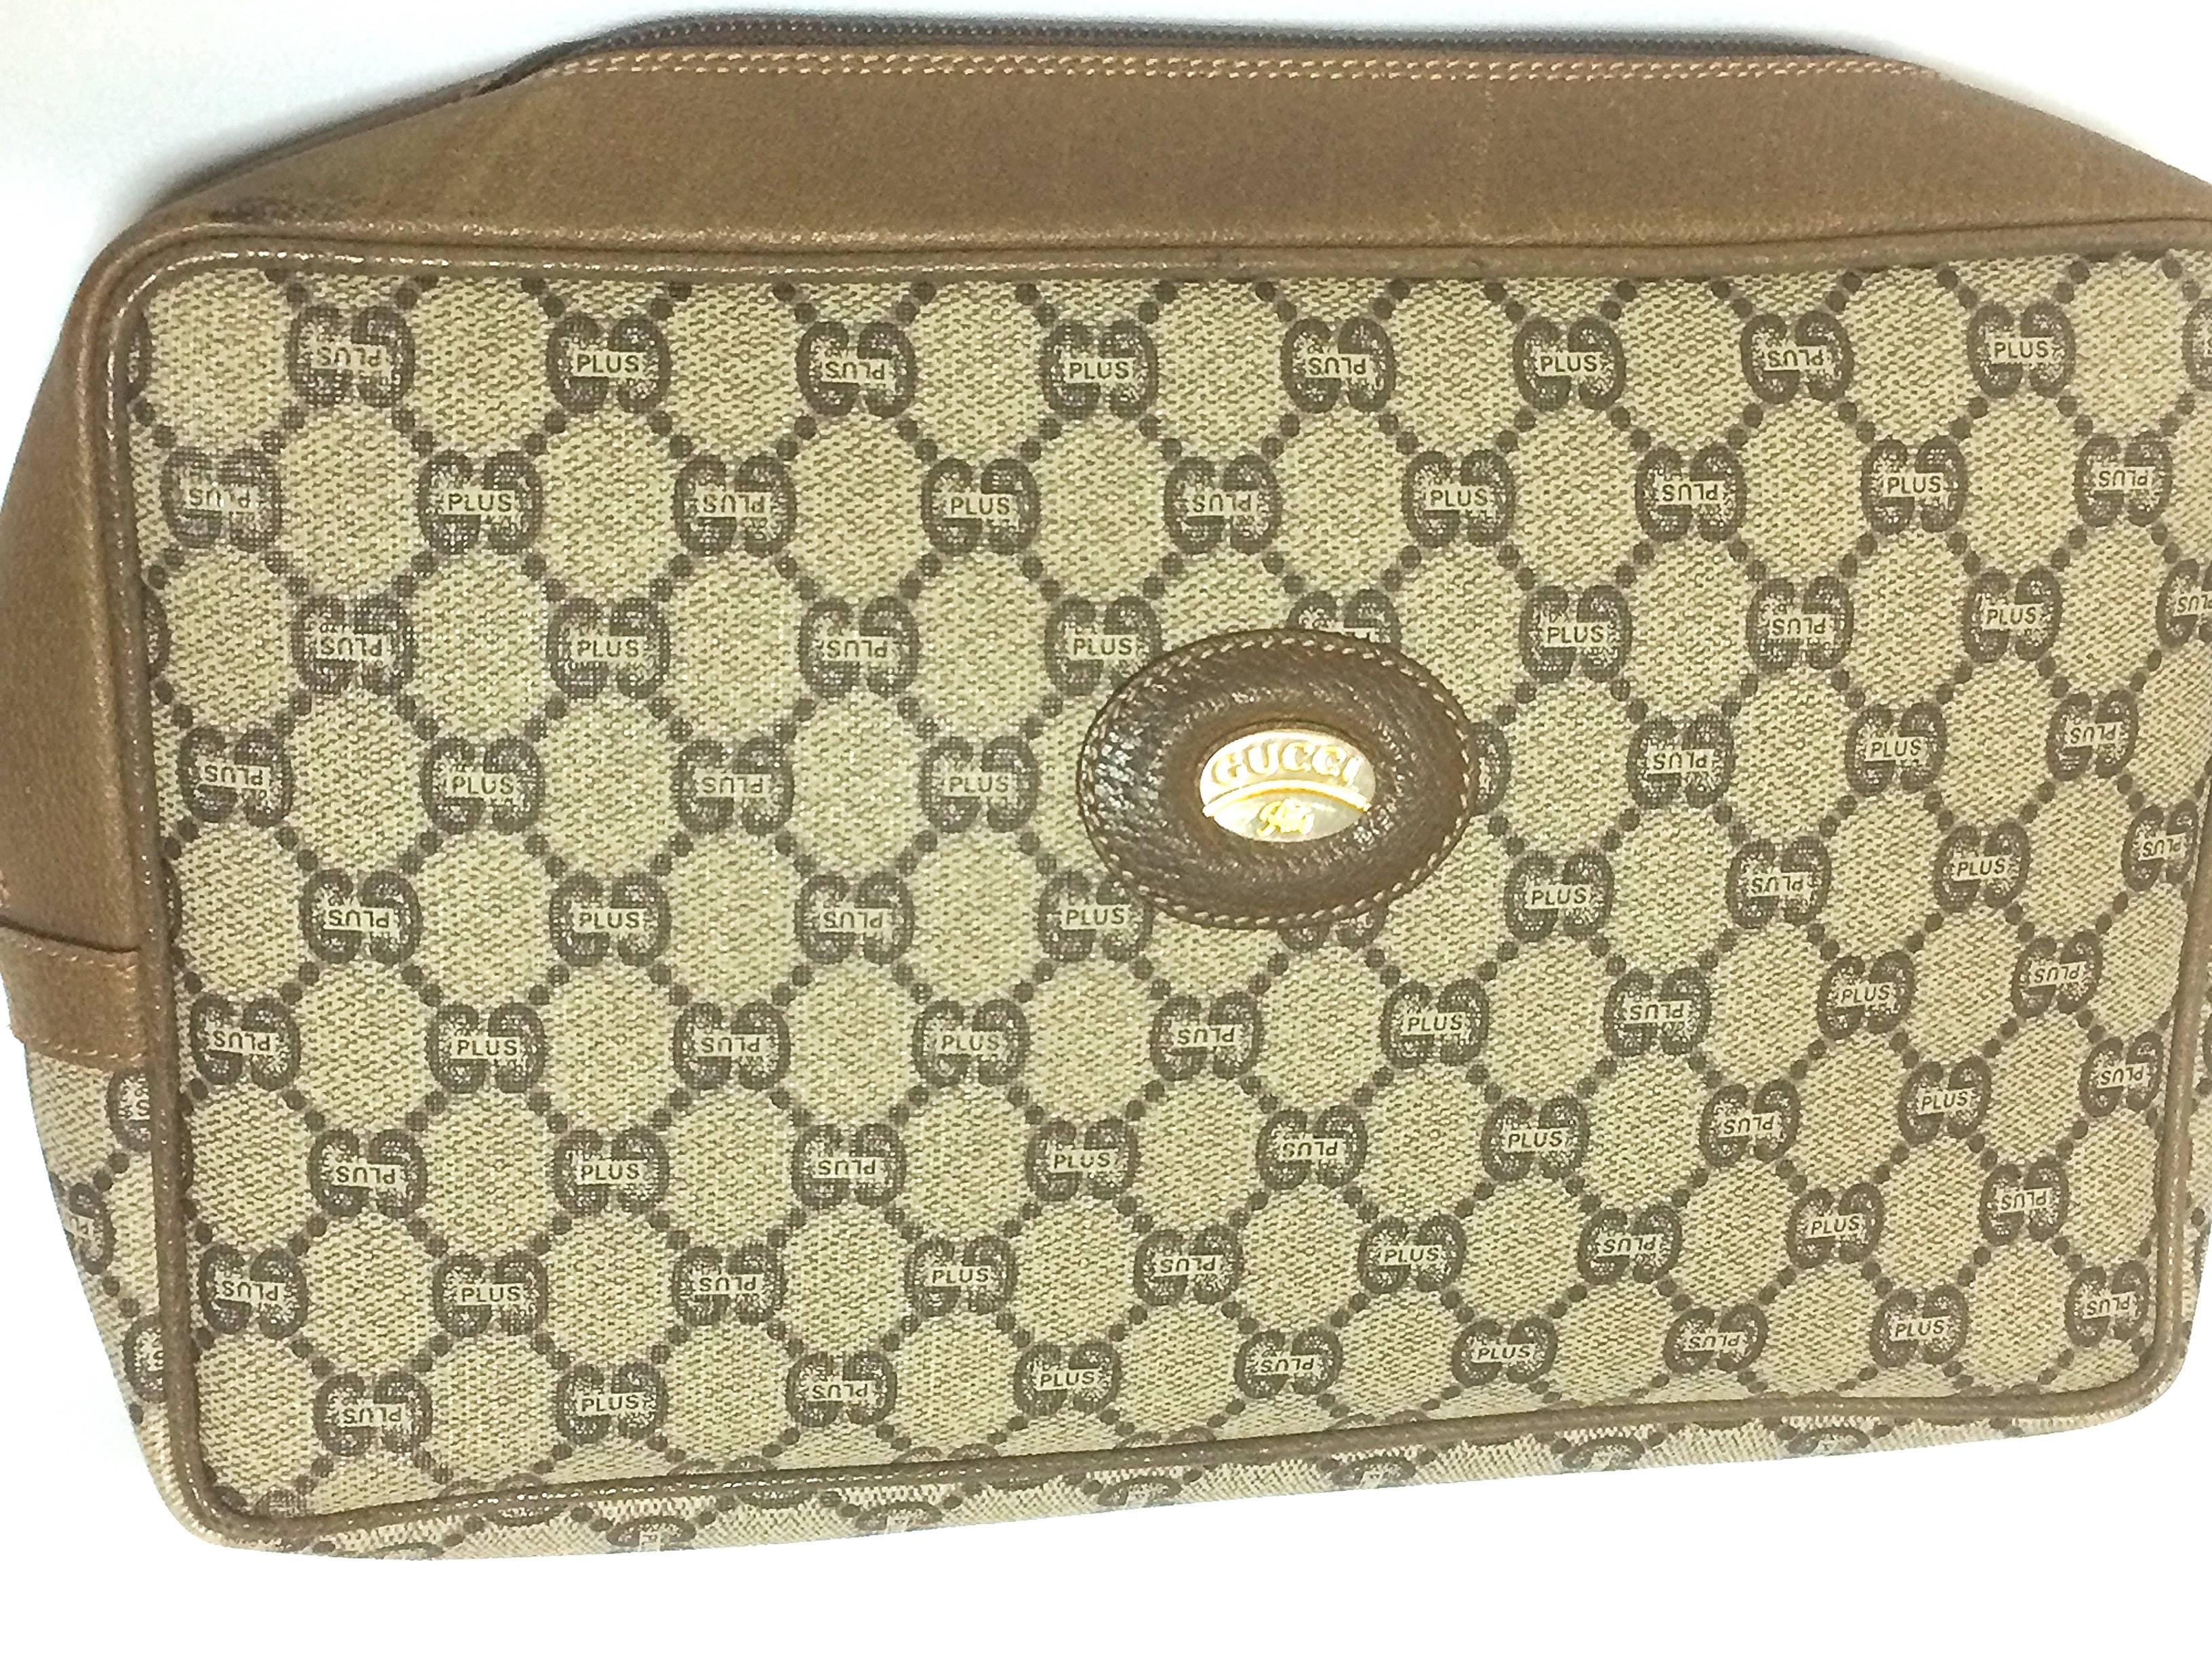 1980's vintage Gucci Plus beige monogram large size  makeup purse, toiletry pouch, purse with golden logo plate. Unisex use.

Looking classic and elegant with its iconic monogram patterns and the Gucci Plus gold tone plate at the front.
The purse